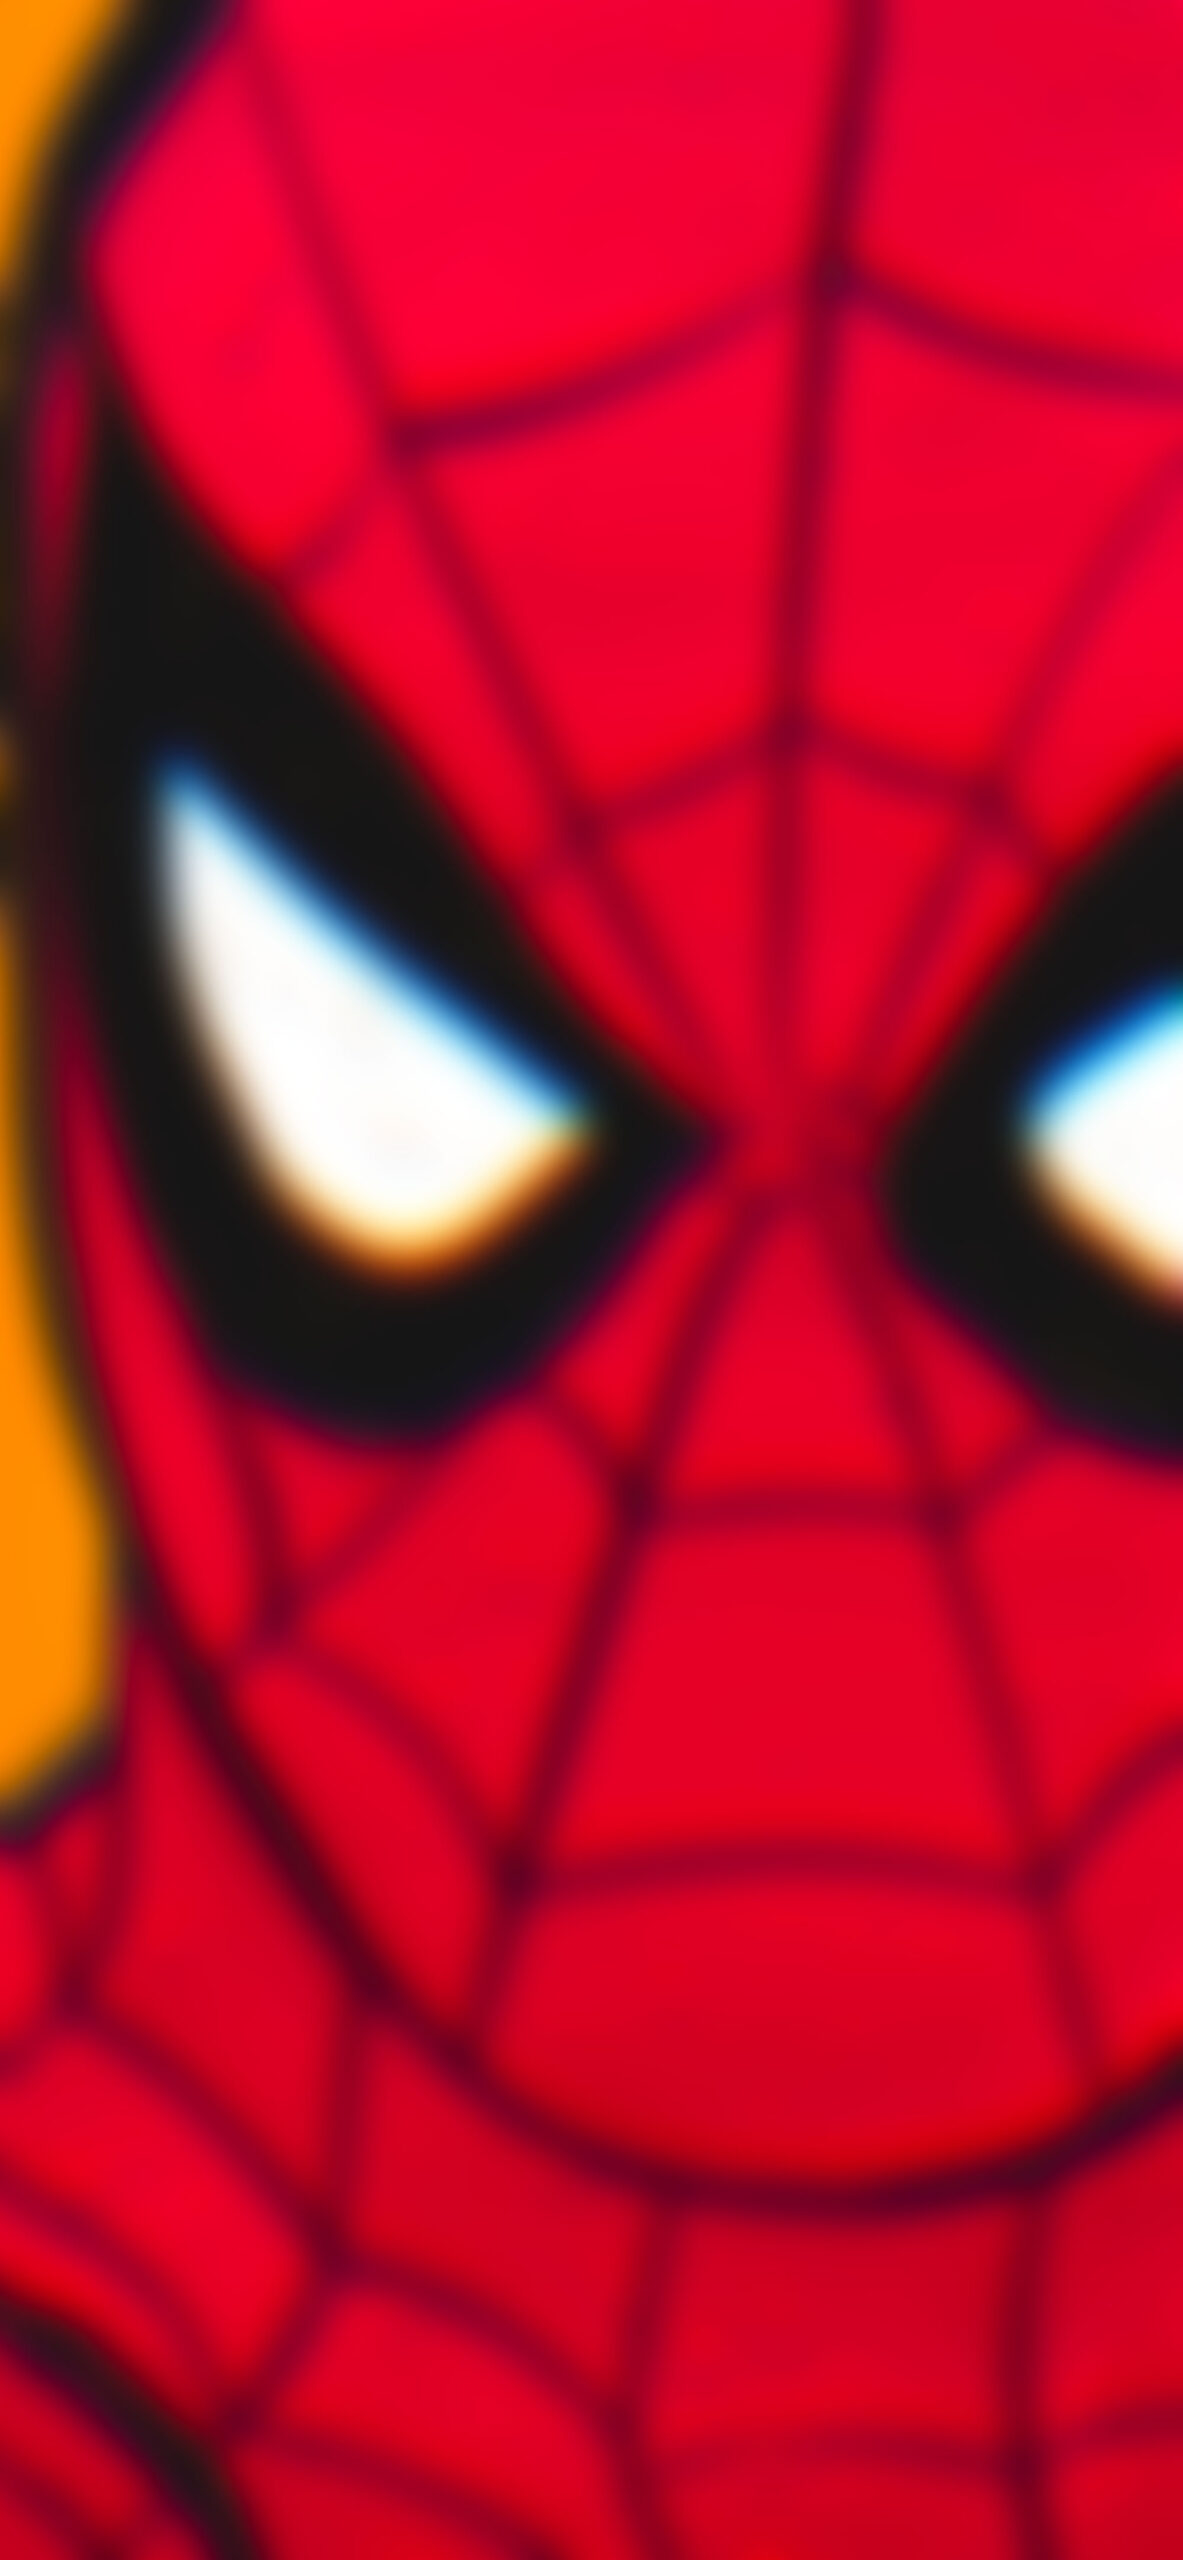 spiderman mask face close up red blur wallpaper